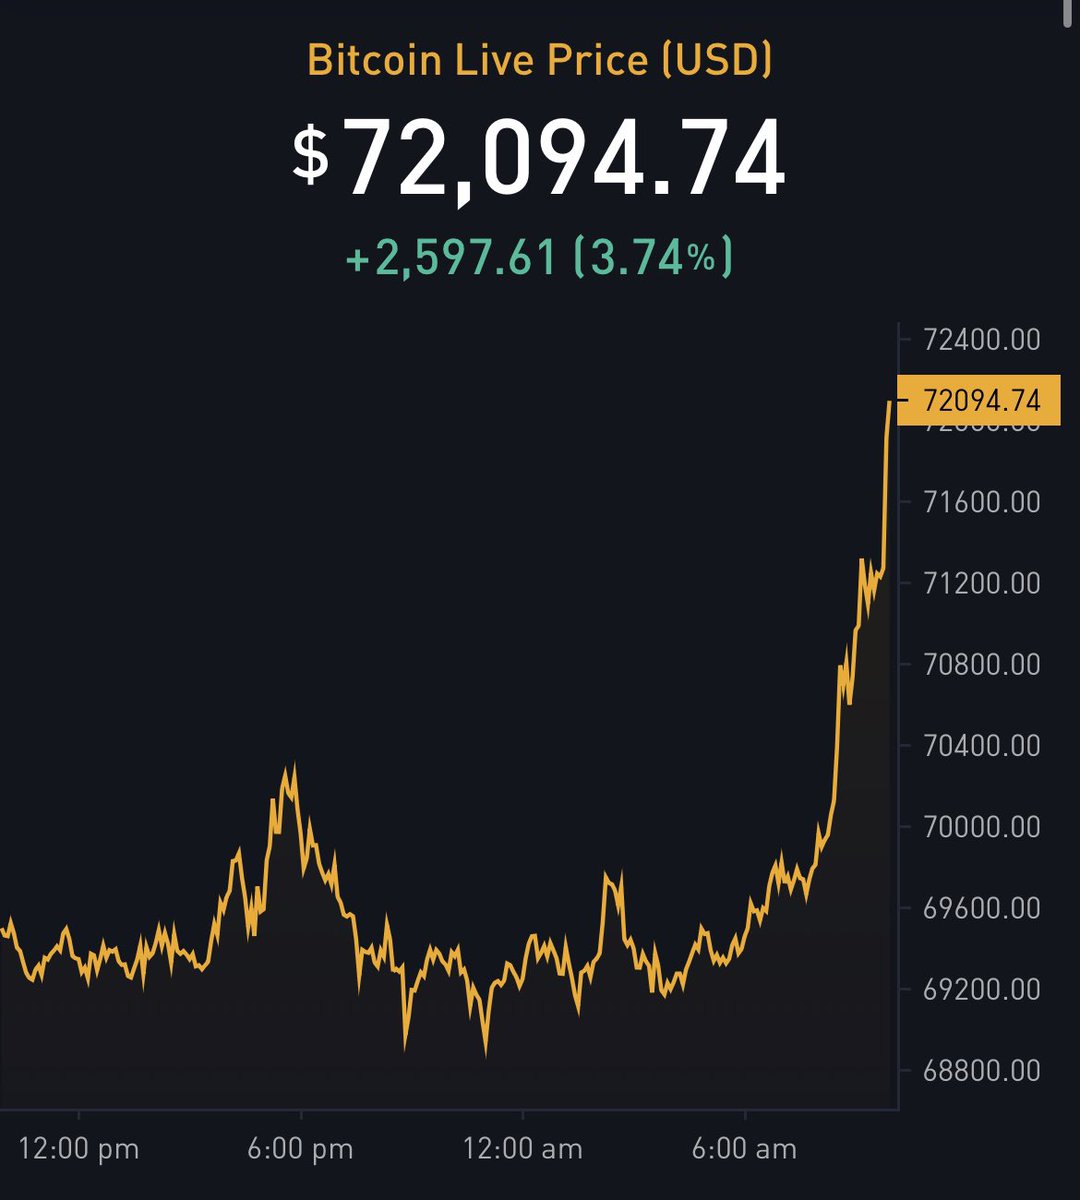 JUST IN: $72,000 #Bitcoin Only $1,000 away from ATH! 🚀